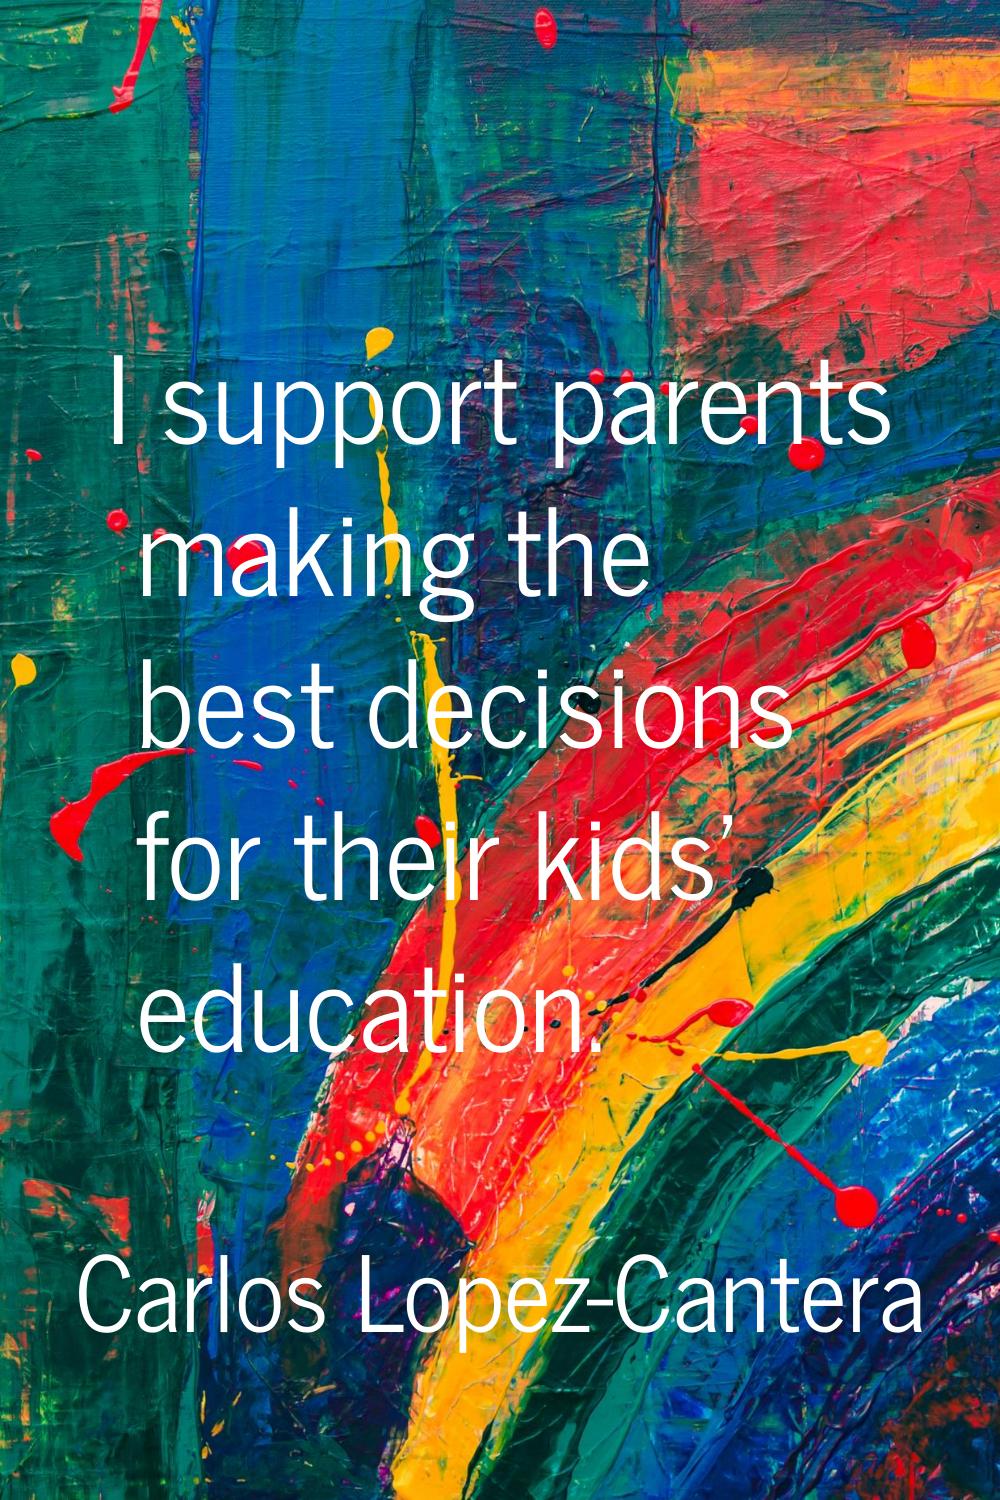 I support parents making the best decisions for their kids' education.